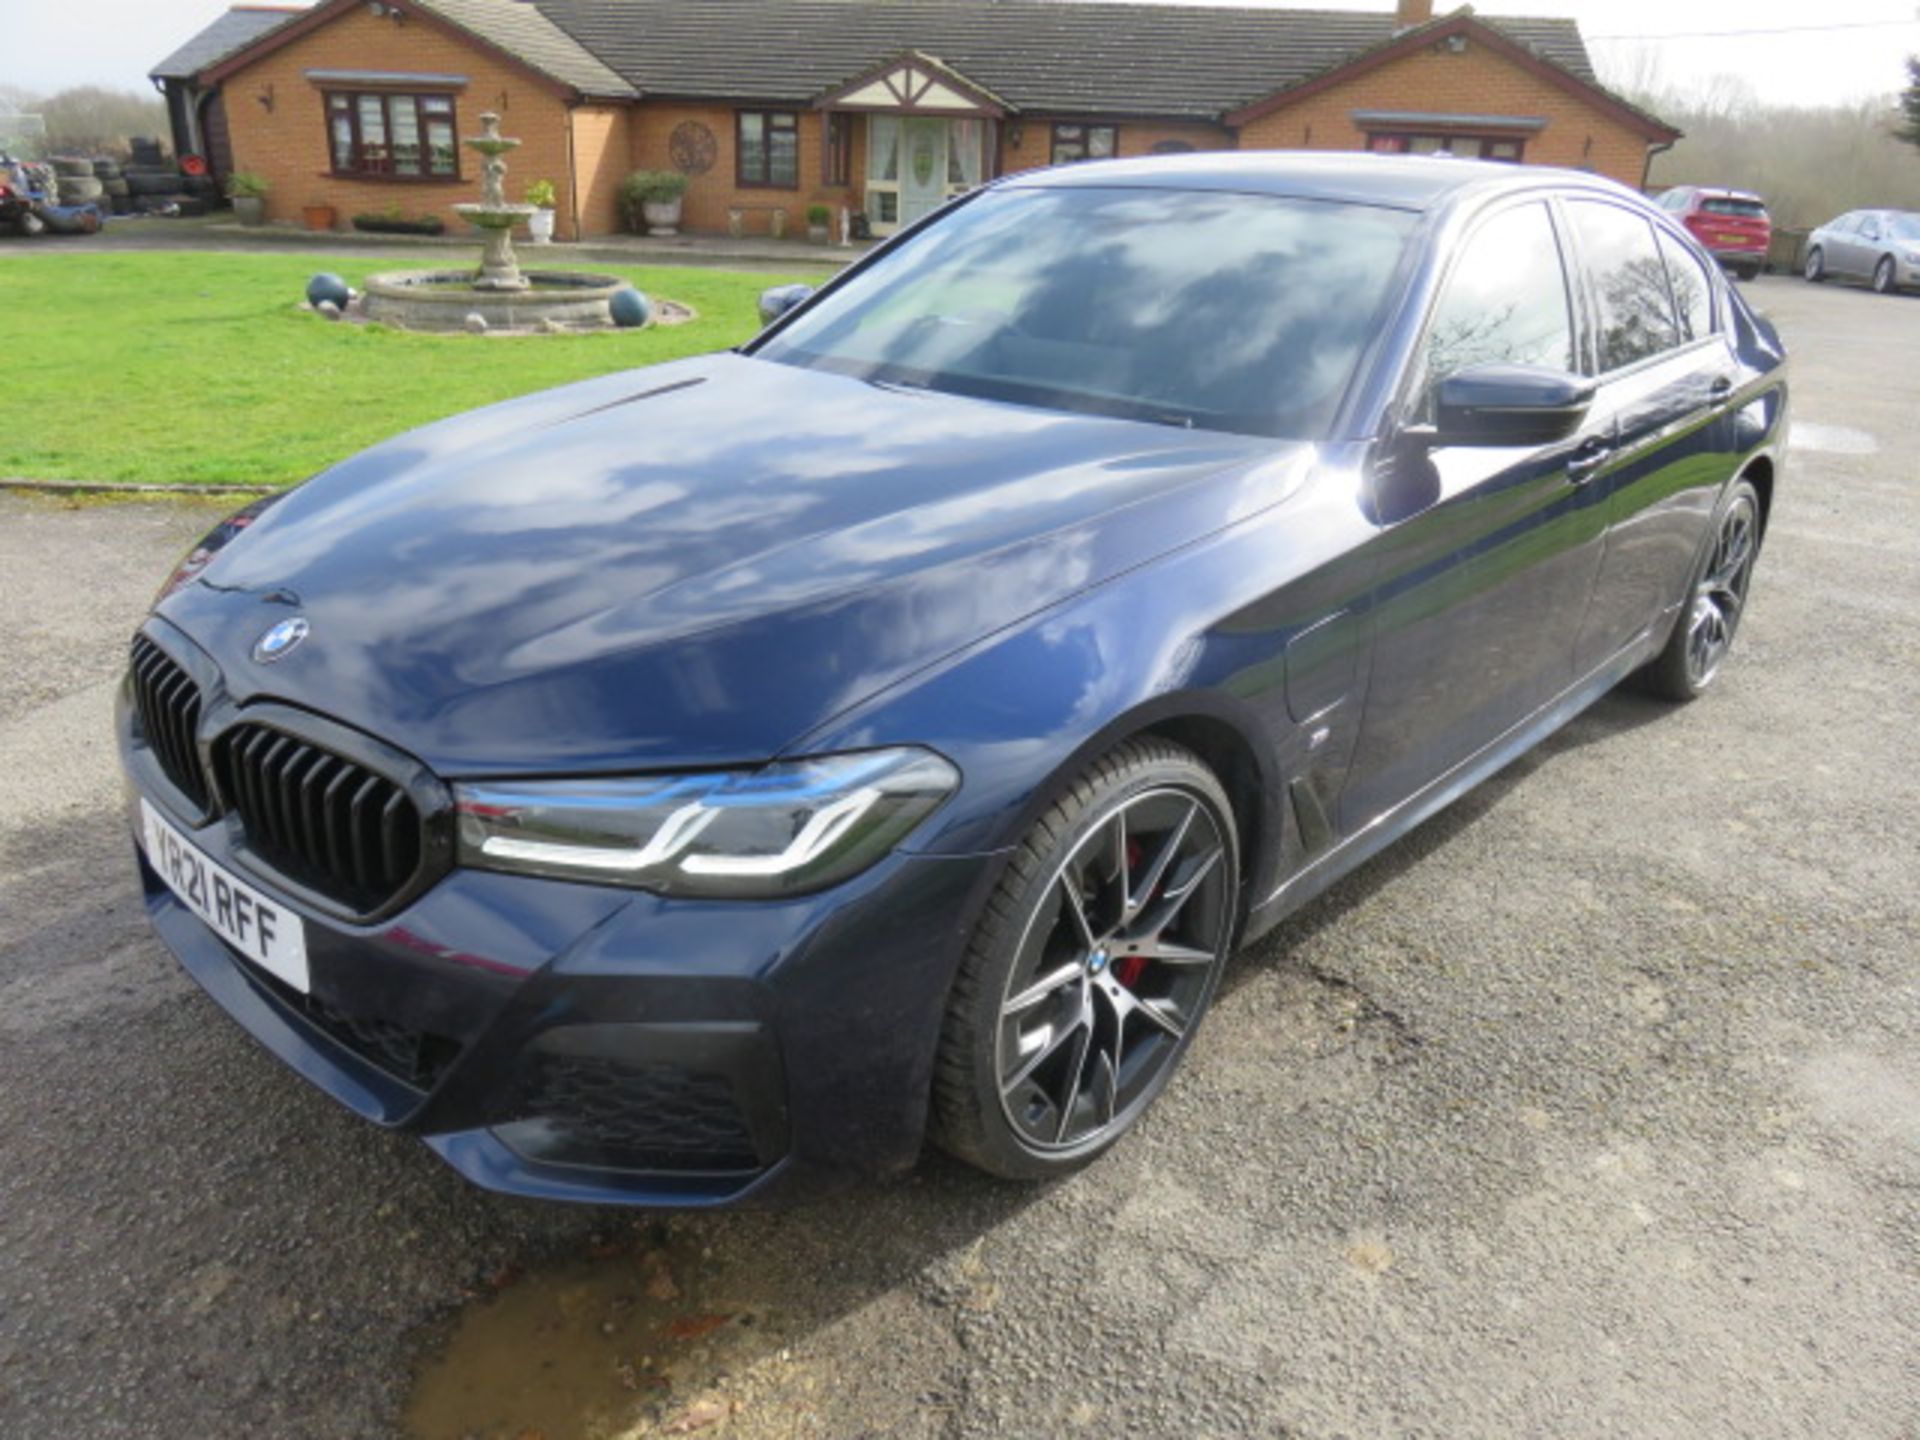 1 BMW 530e XDRIVE M Sport Edition 2.0 Hybrid Electric Four Door Saloon. - Image 3 of 15